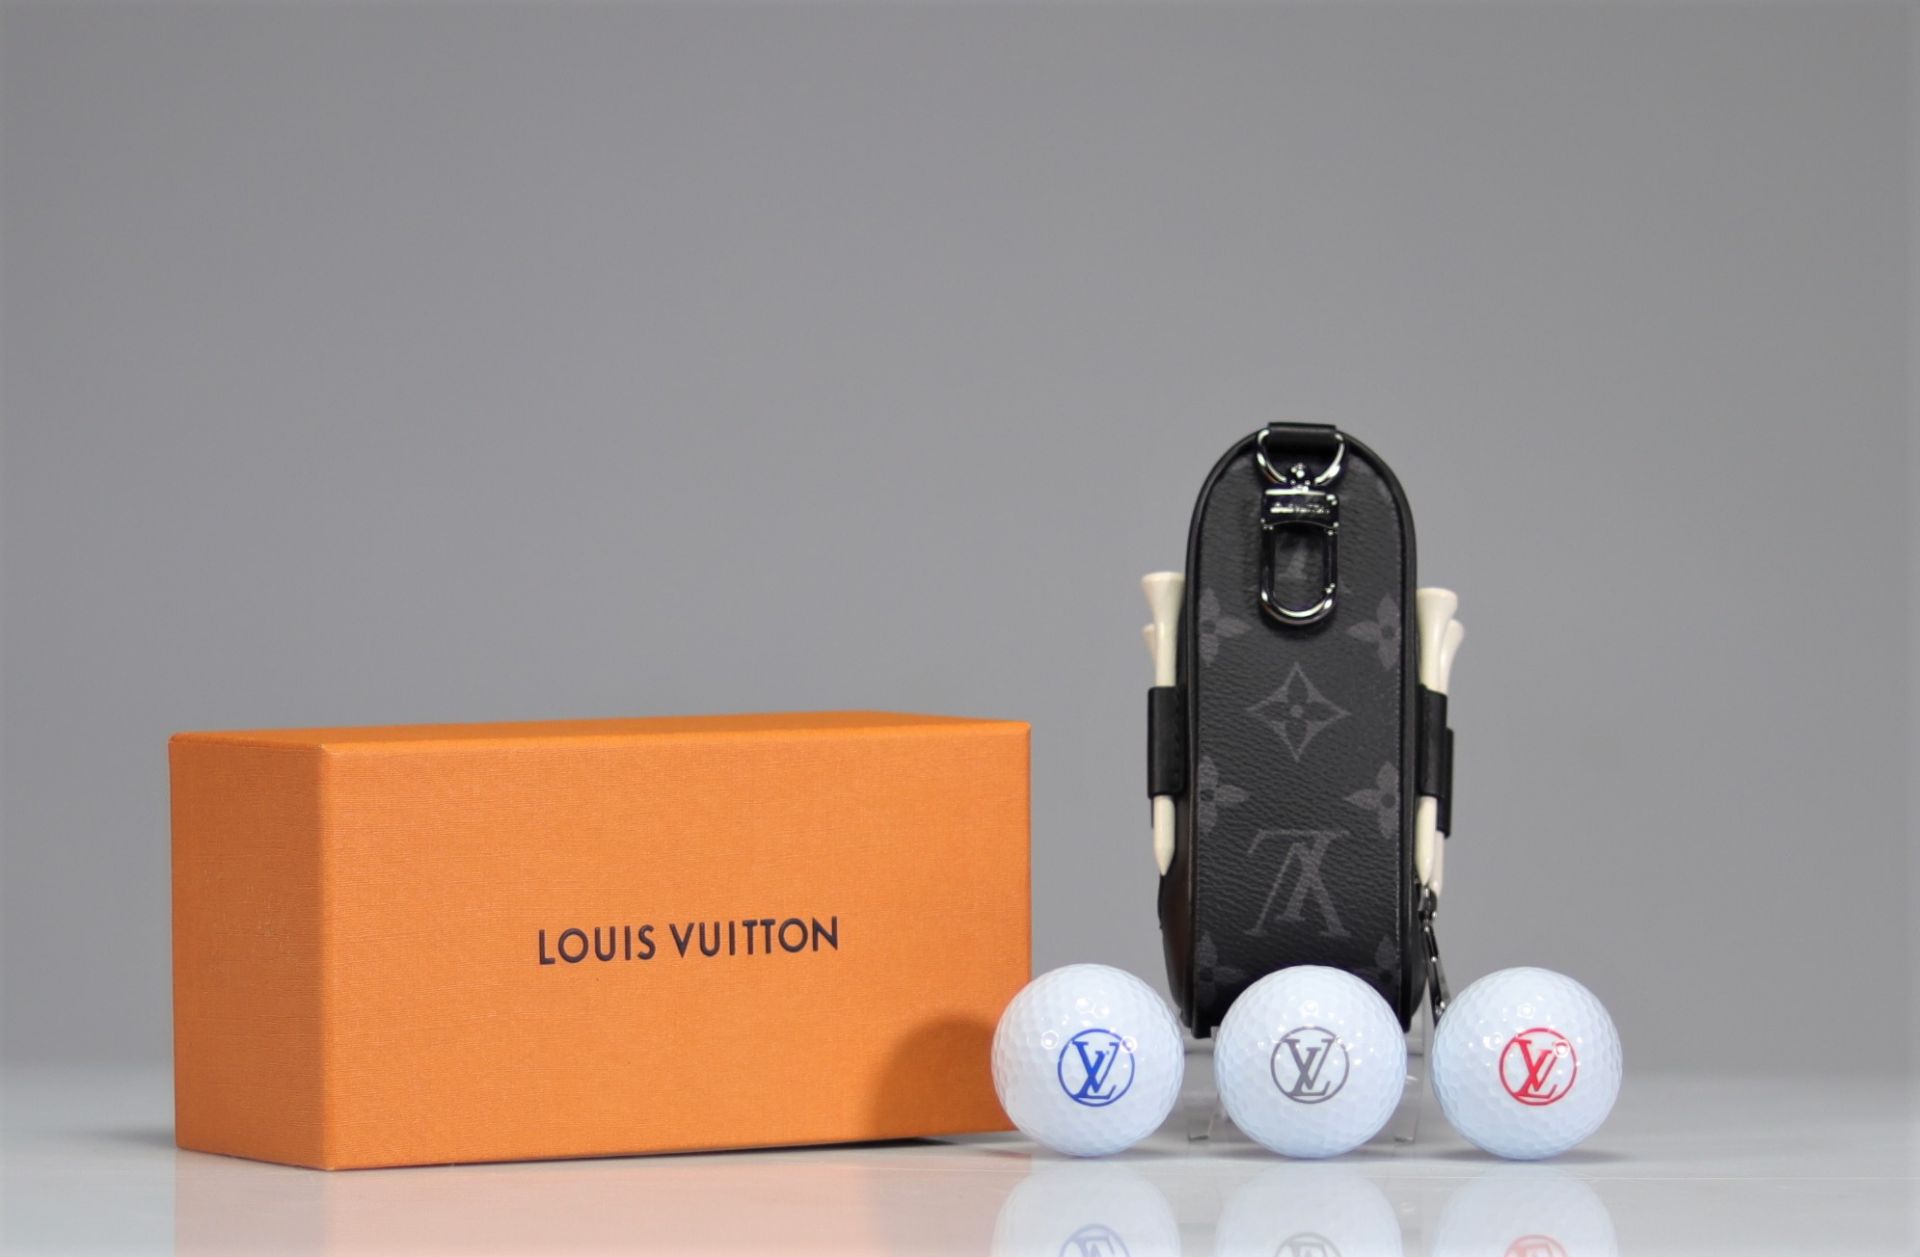 Louis Vuitton. "Andrews Golf Kit". Includes three golf balls, four tees and the Eclipse monogram kit